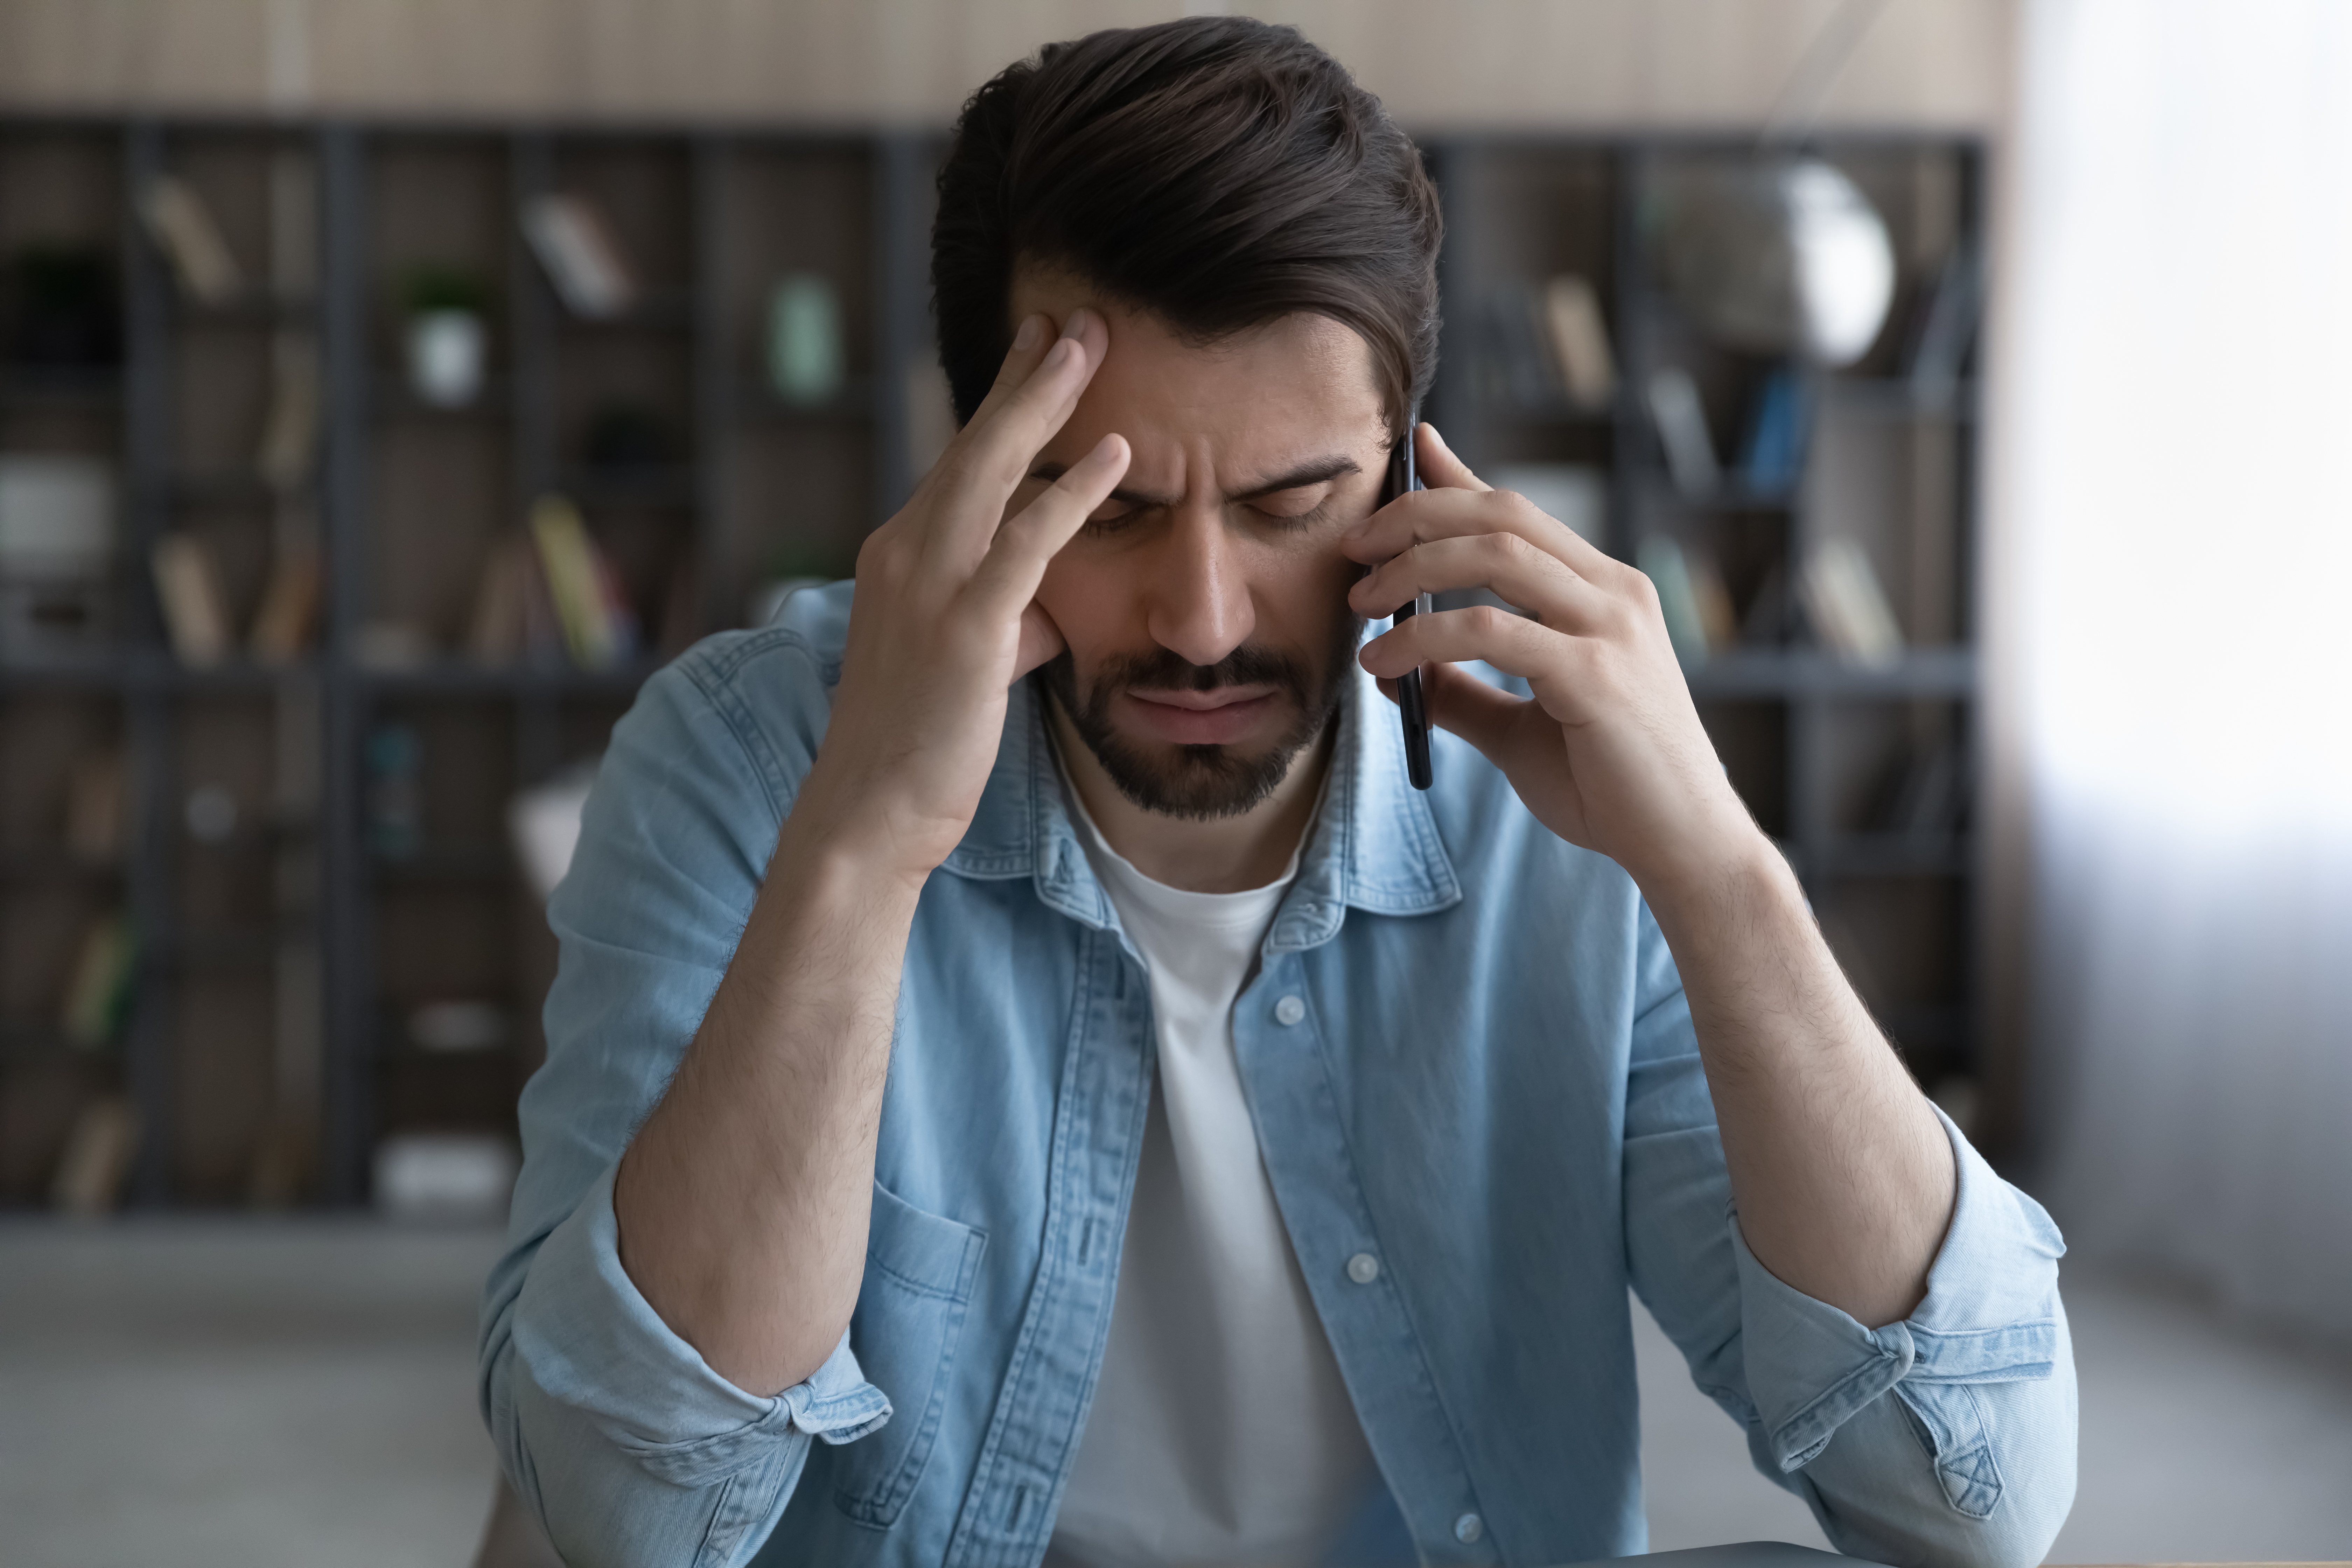 Frustrated man on the phone | Source: Shutterstock